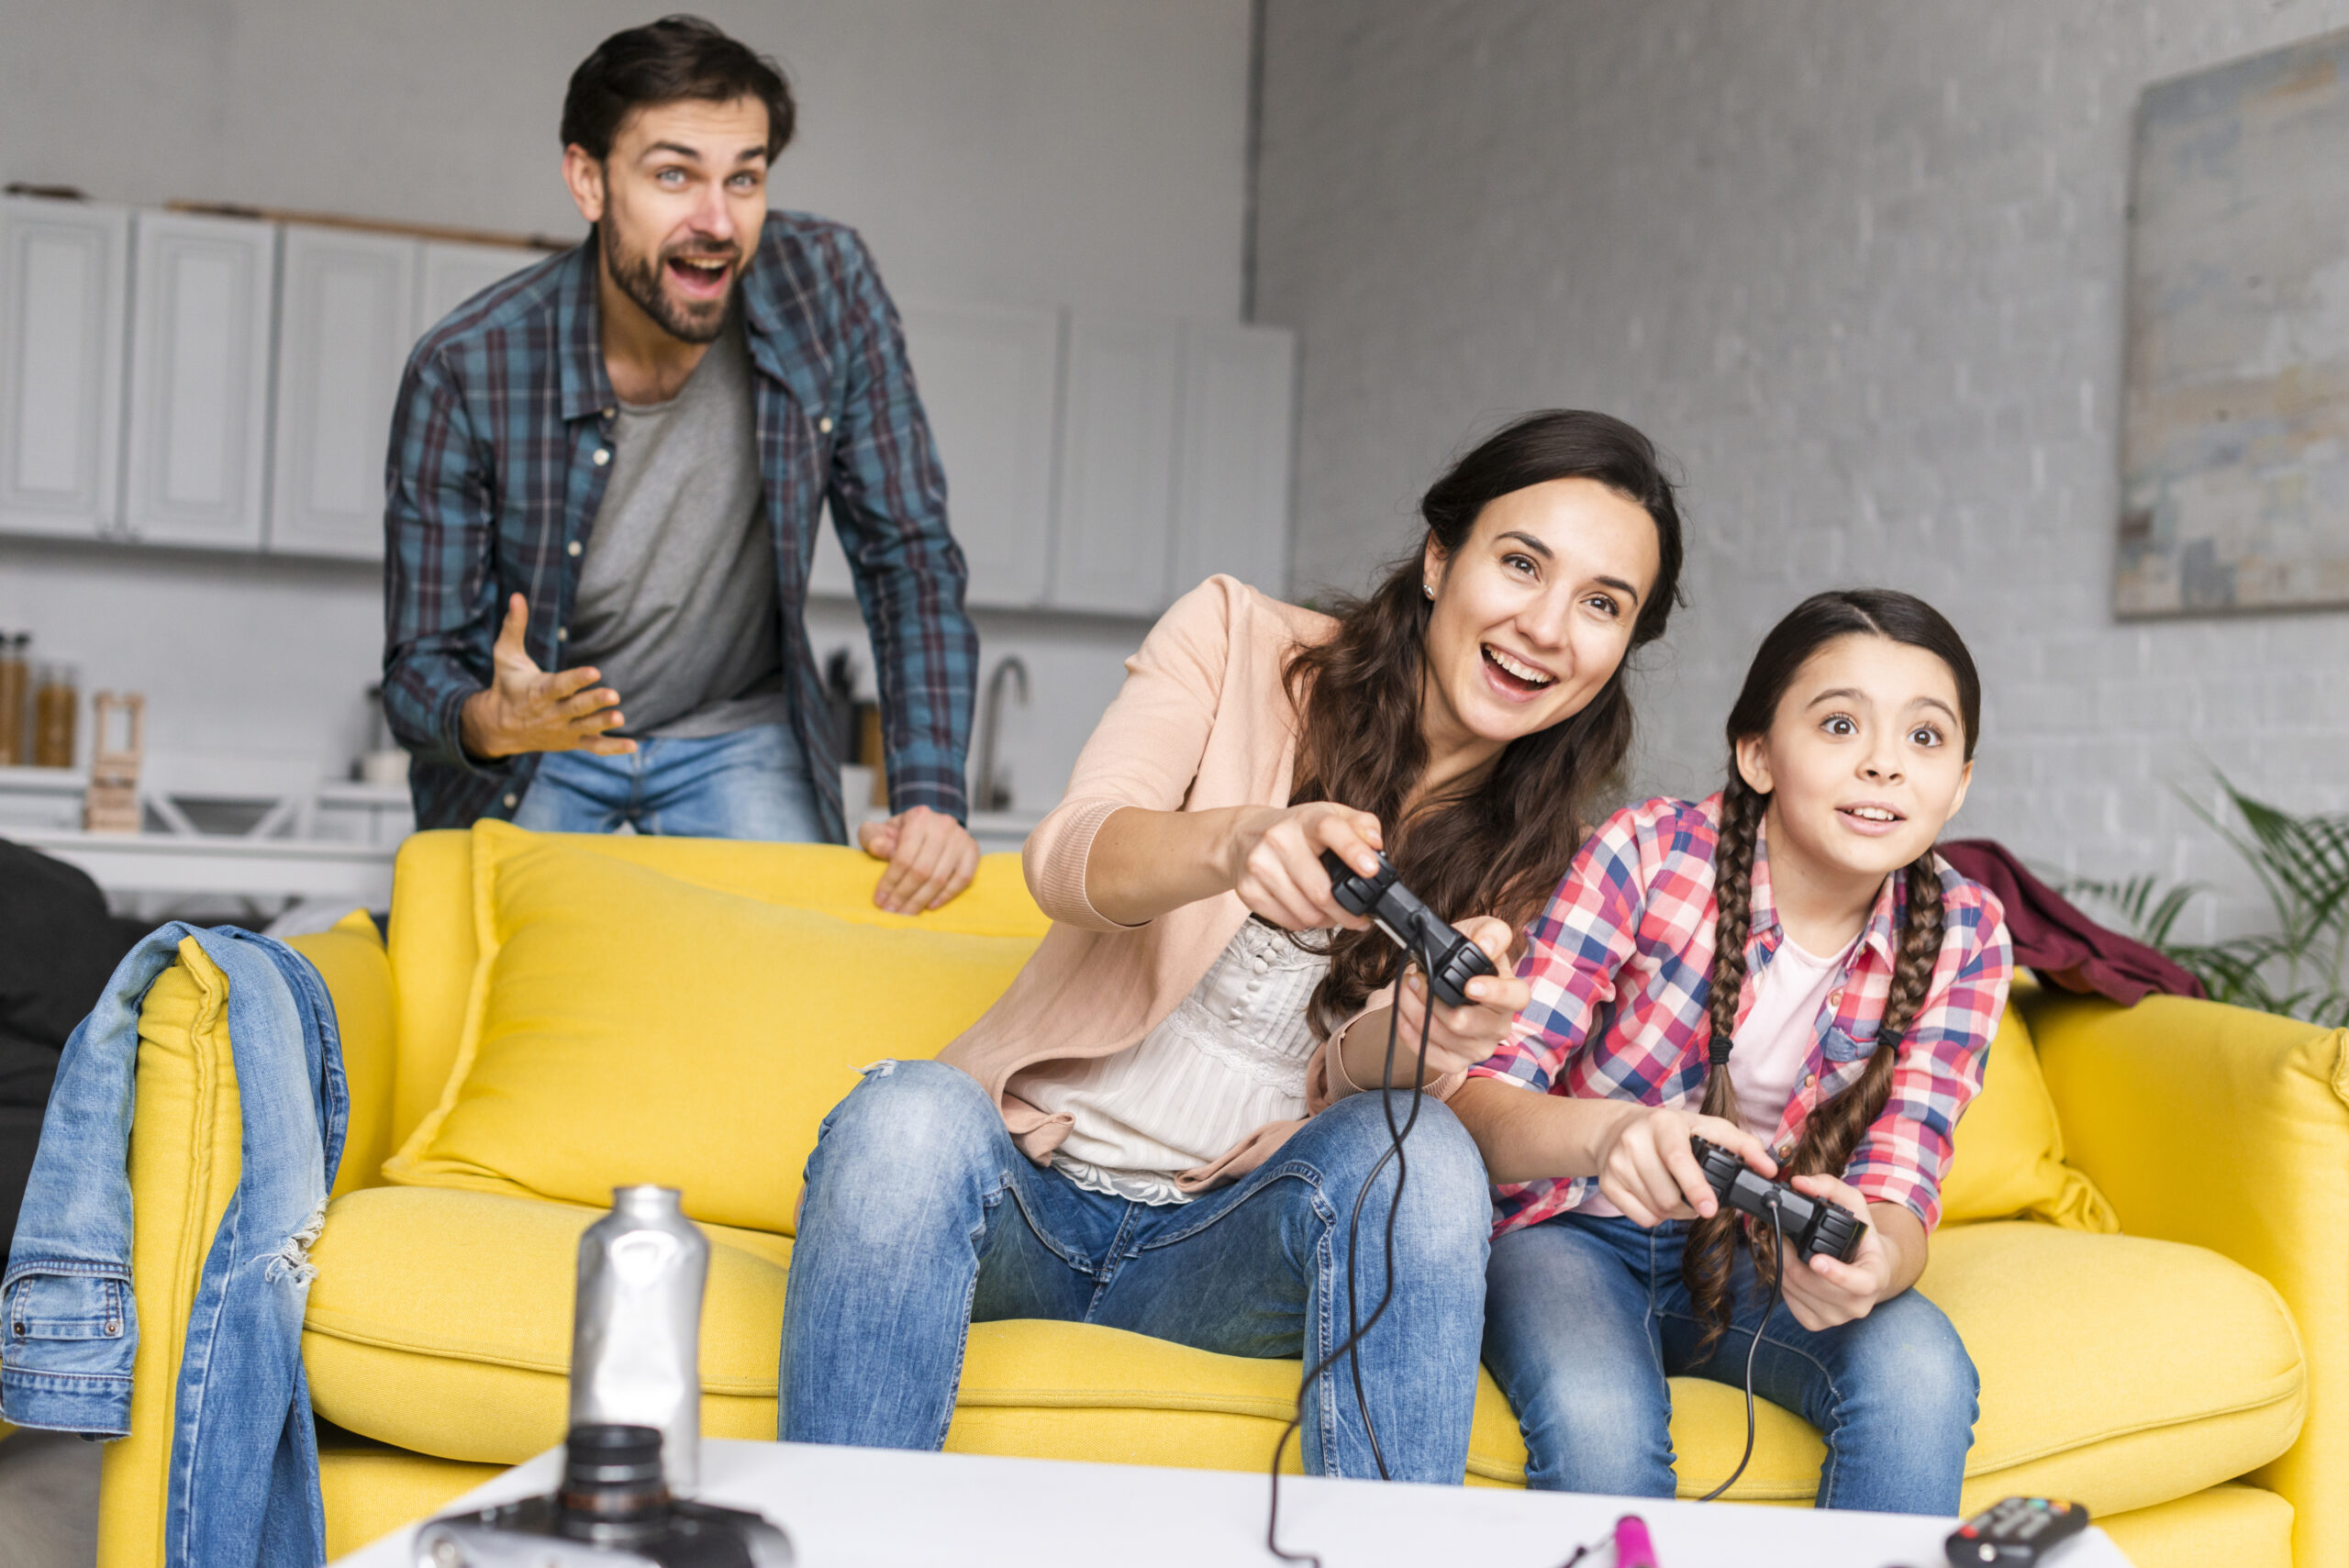 5 Best PC Games for Family Game Night | Cleaning Lady